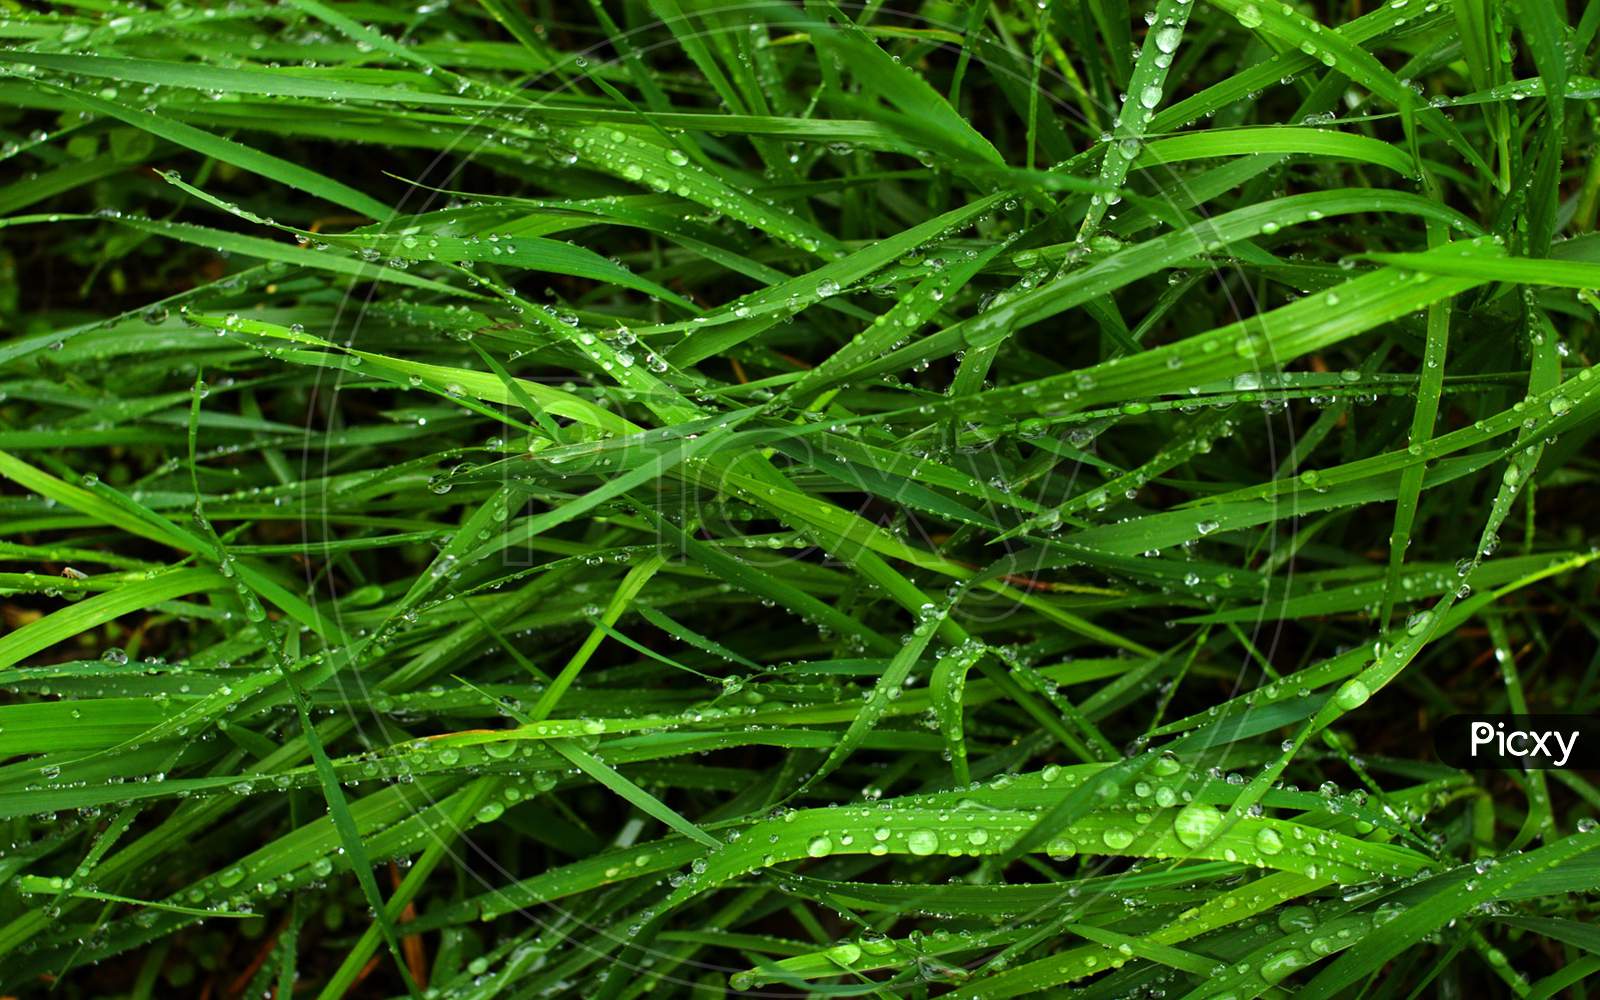 Drops on the grass leaves